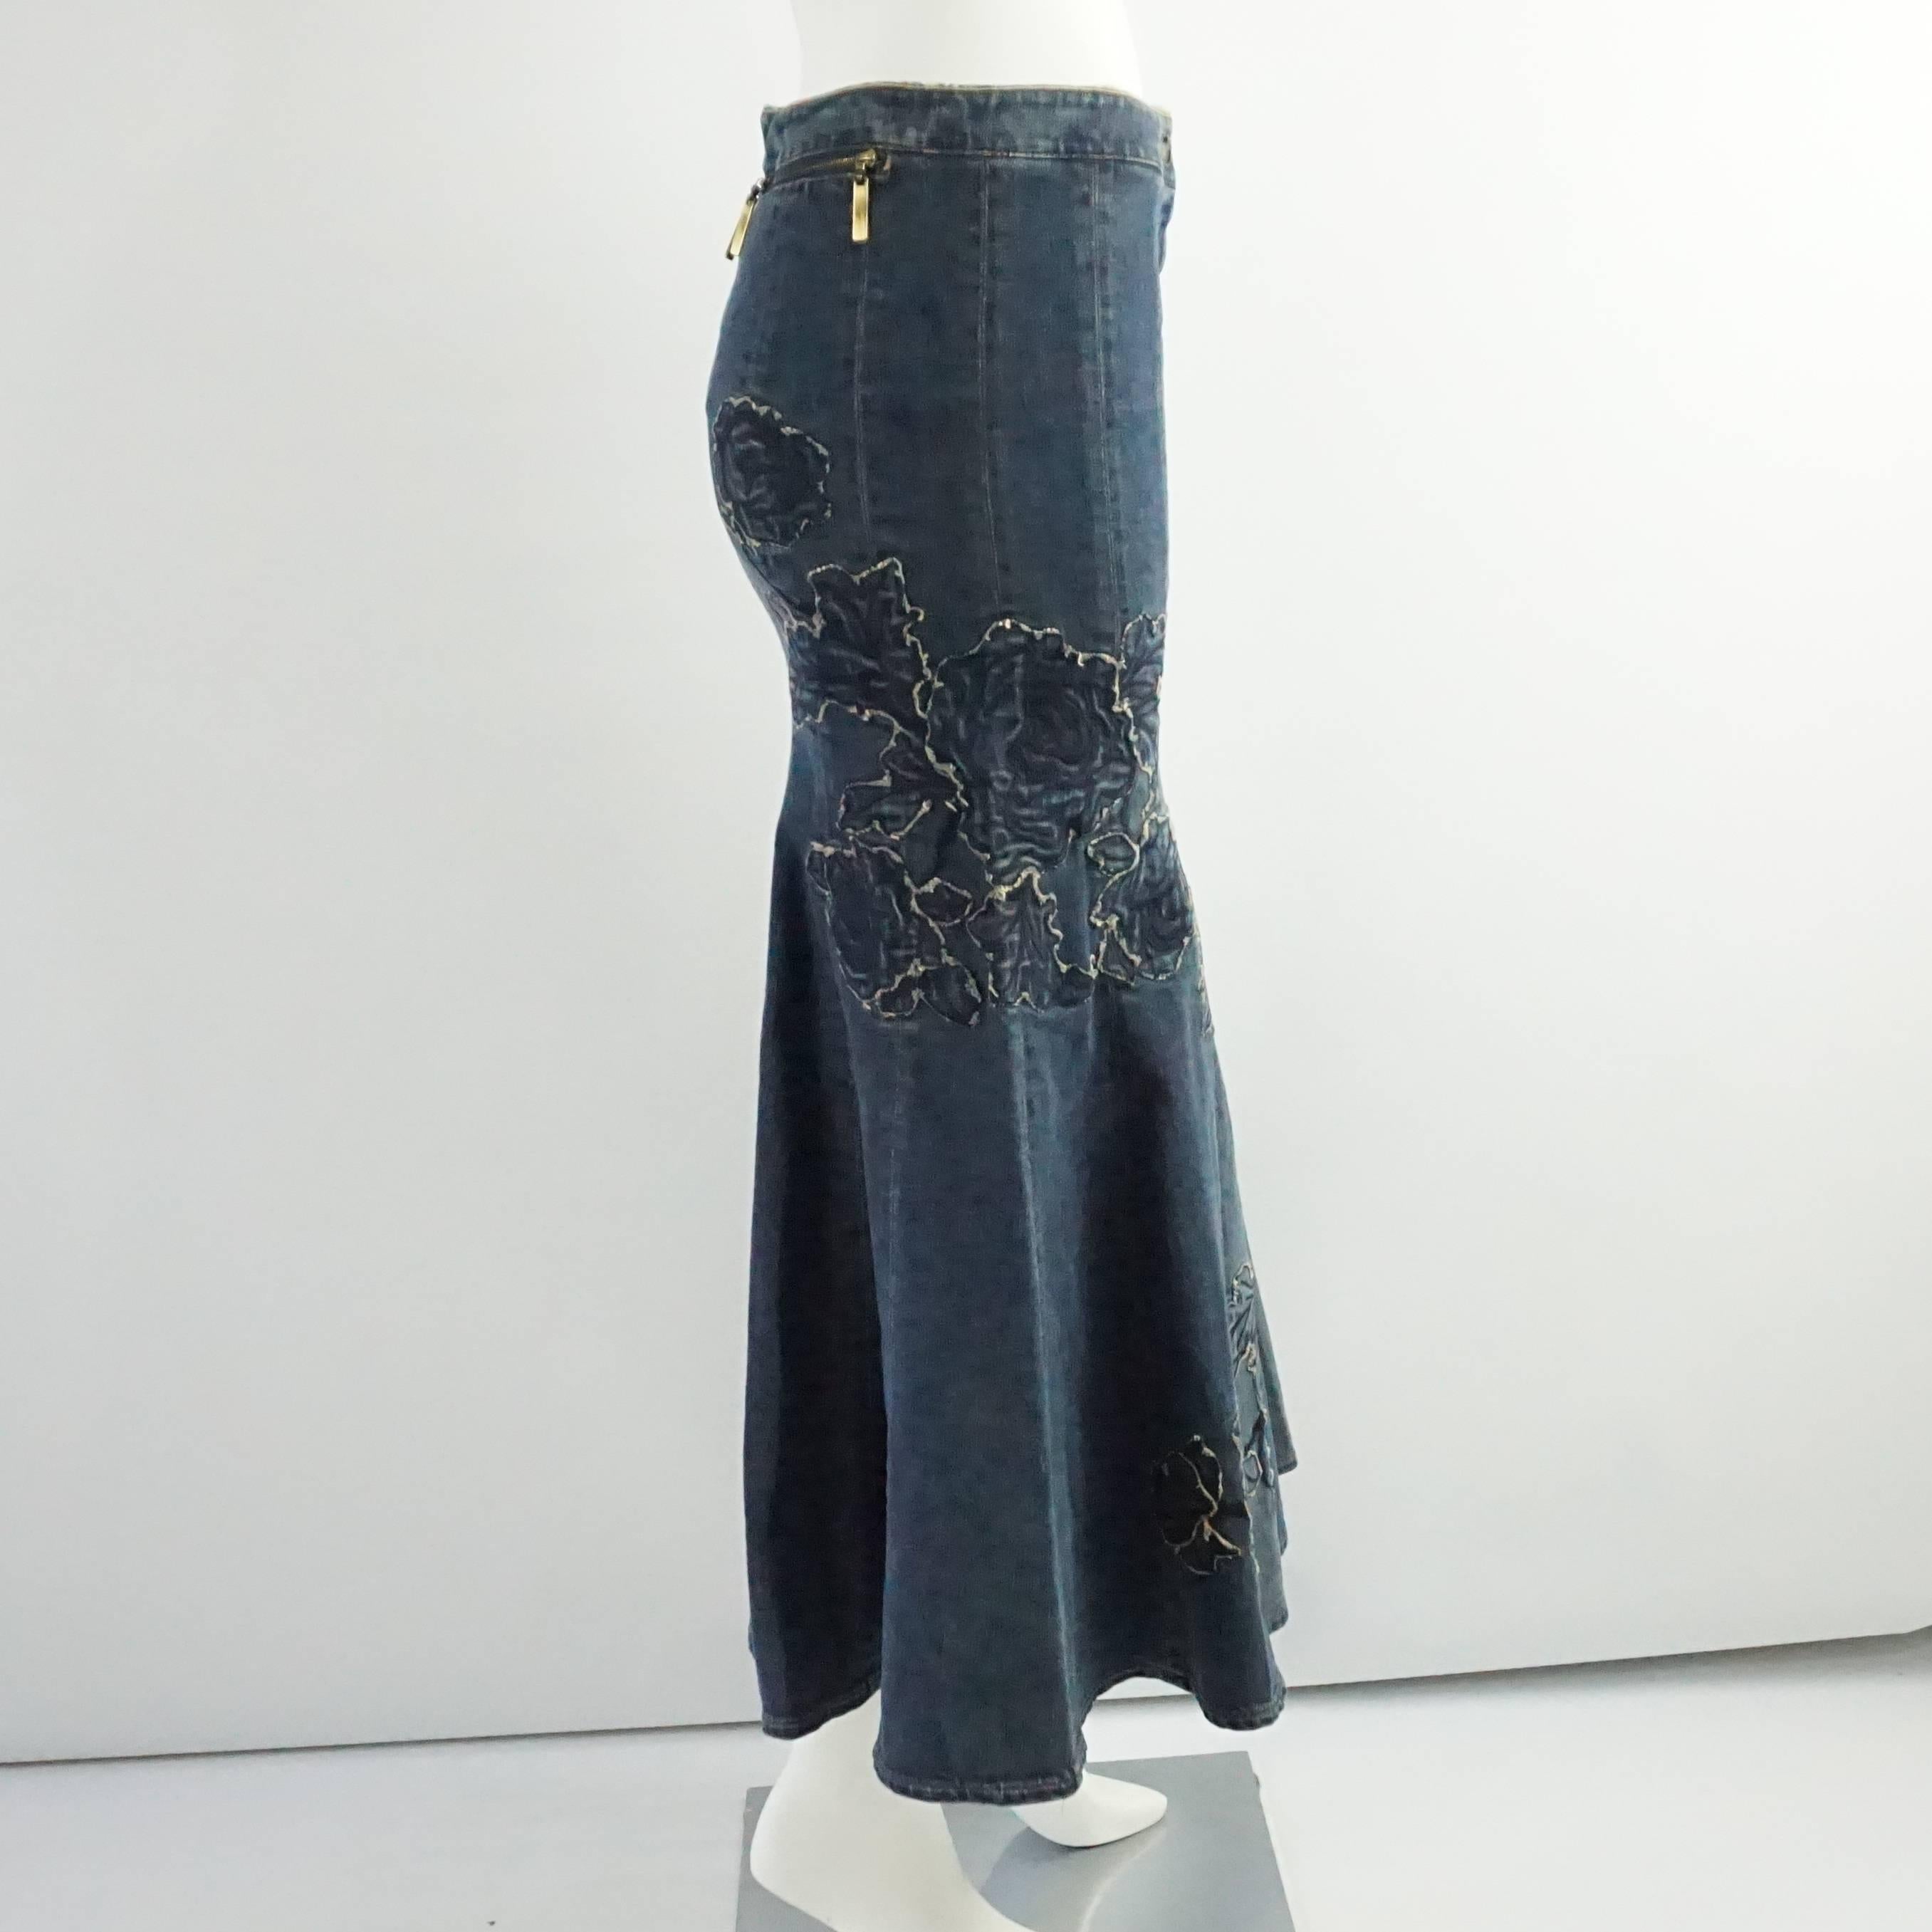 This Roberto Cavalli denim skirt is fitted and then flares out. It features an embroidered rose design and 2 back pockets. Each pocket has 2 zipper pulls. This skirt is in excellent condition.

Measurements
Waist: 30